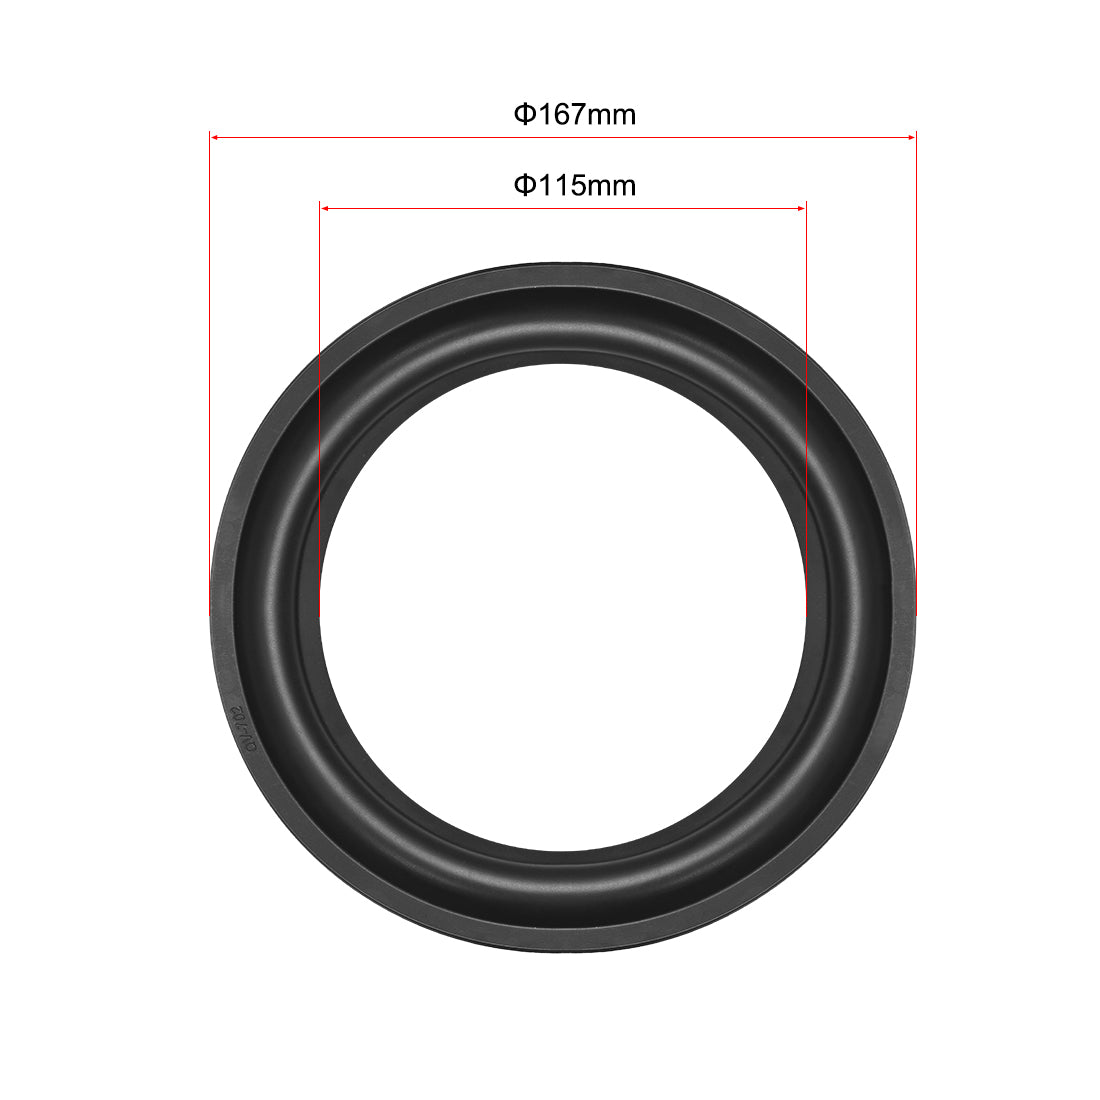 uxcell Uxcell 7" 7inch Rubber Edge Surround Rings Replacement Part for Repair or DIY